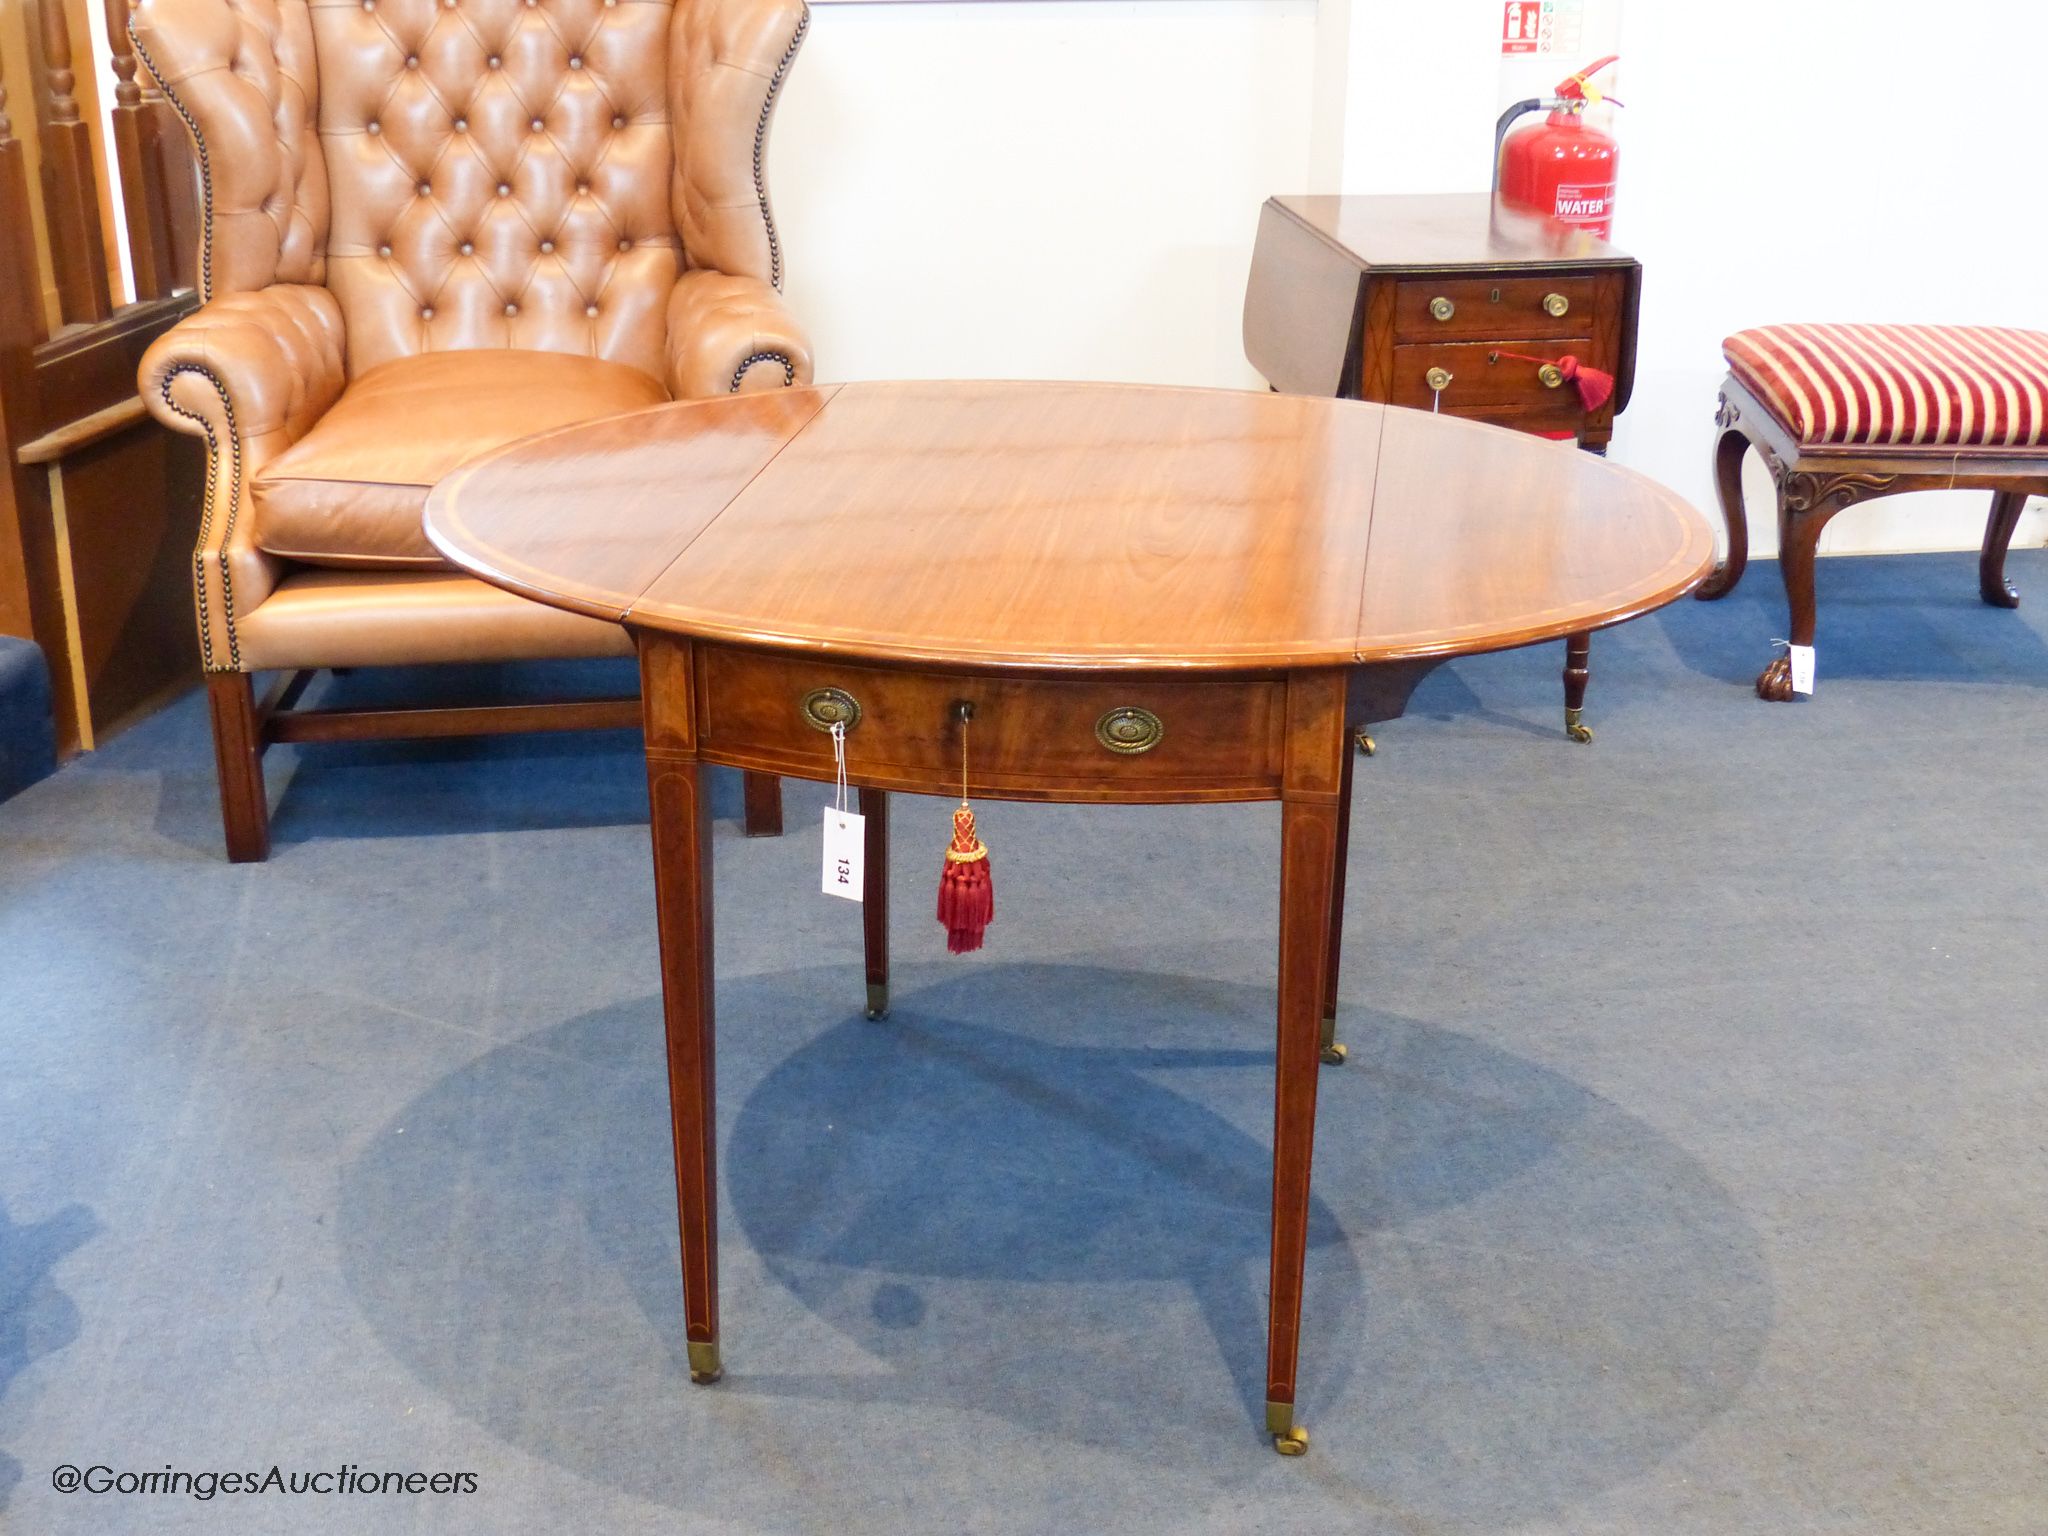 A George III Sheraton period mahogany and satinwood banded oval Pembroke table, 111.5 cm long when open, 83.5 cm deep, 72 cm high